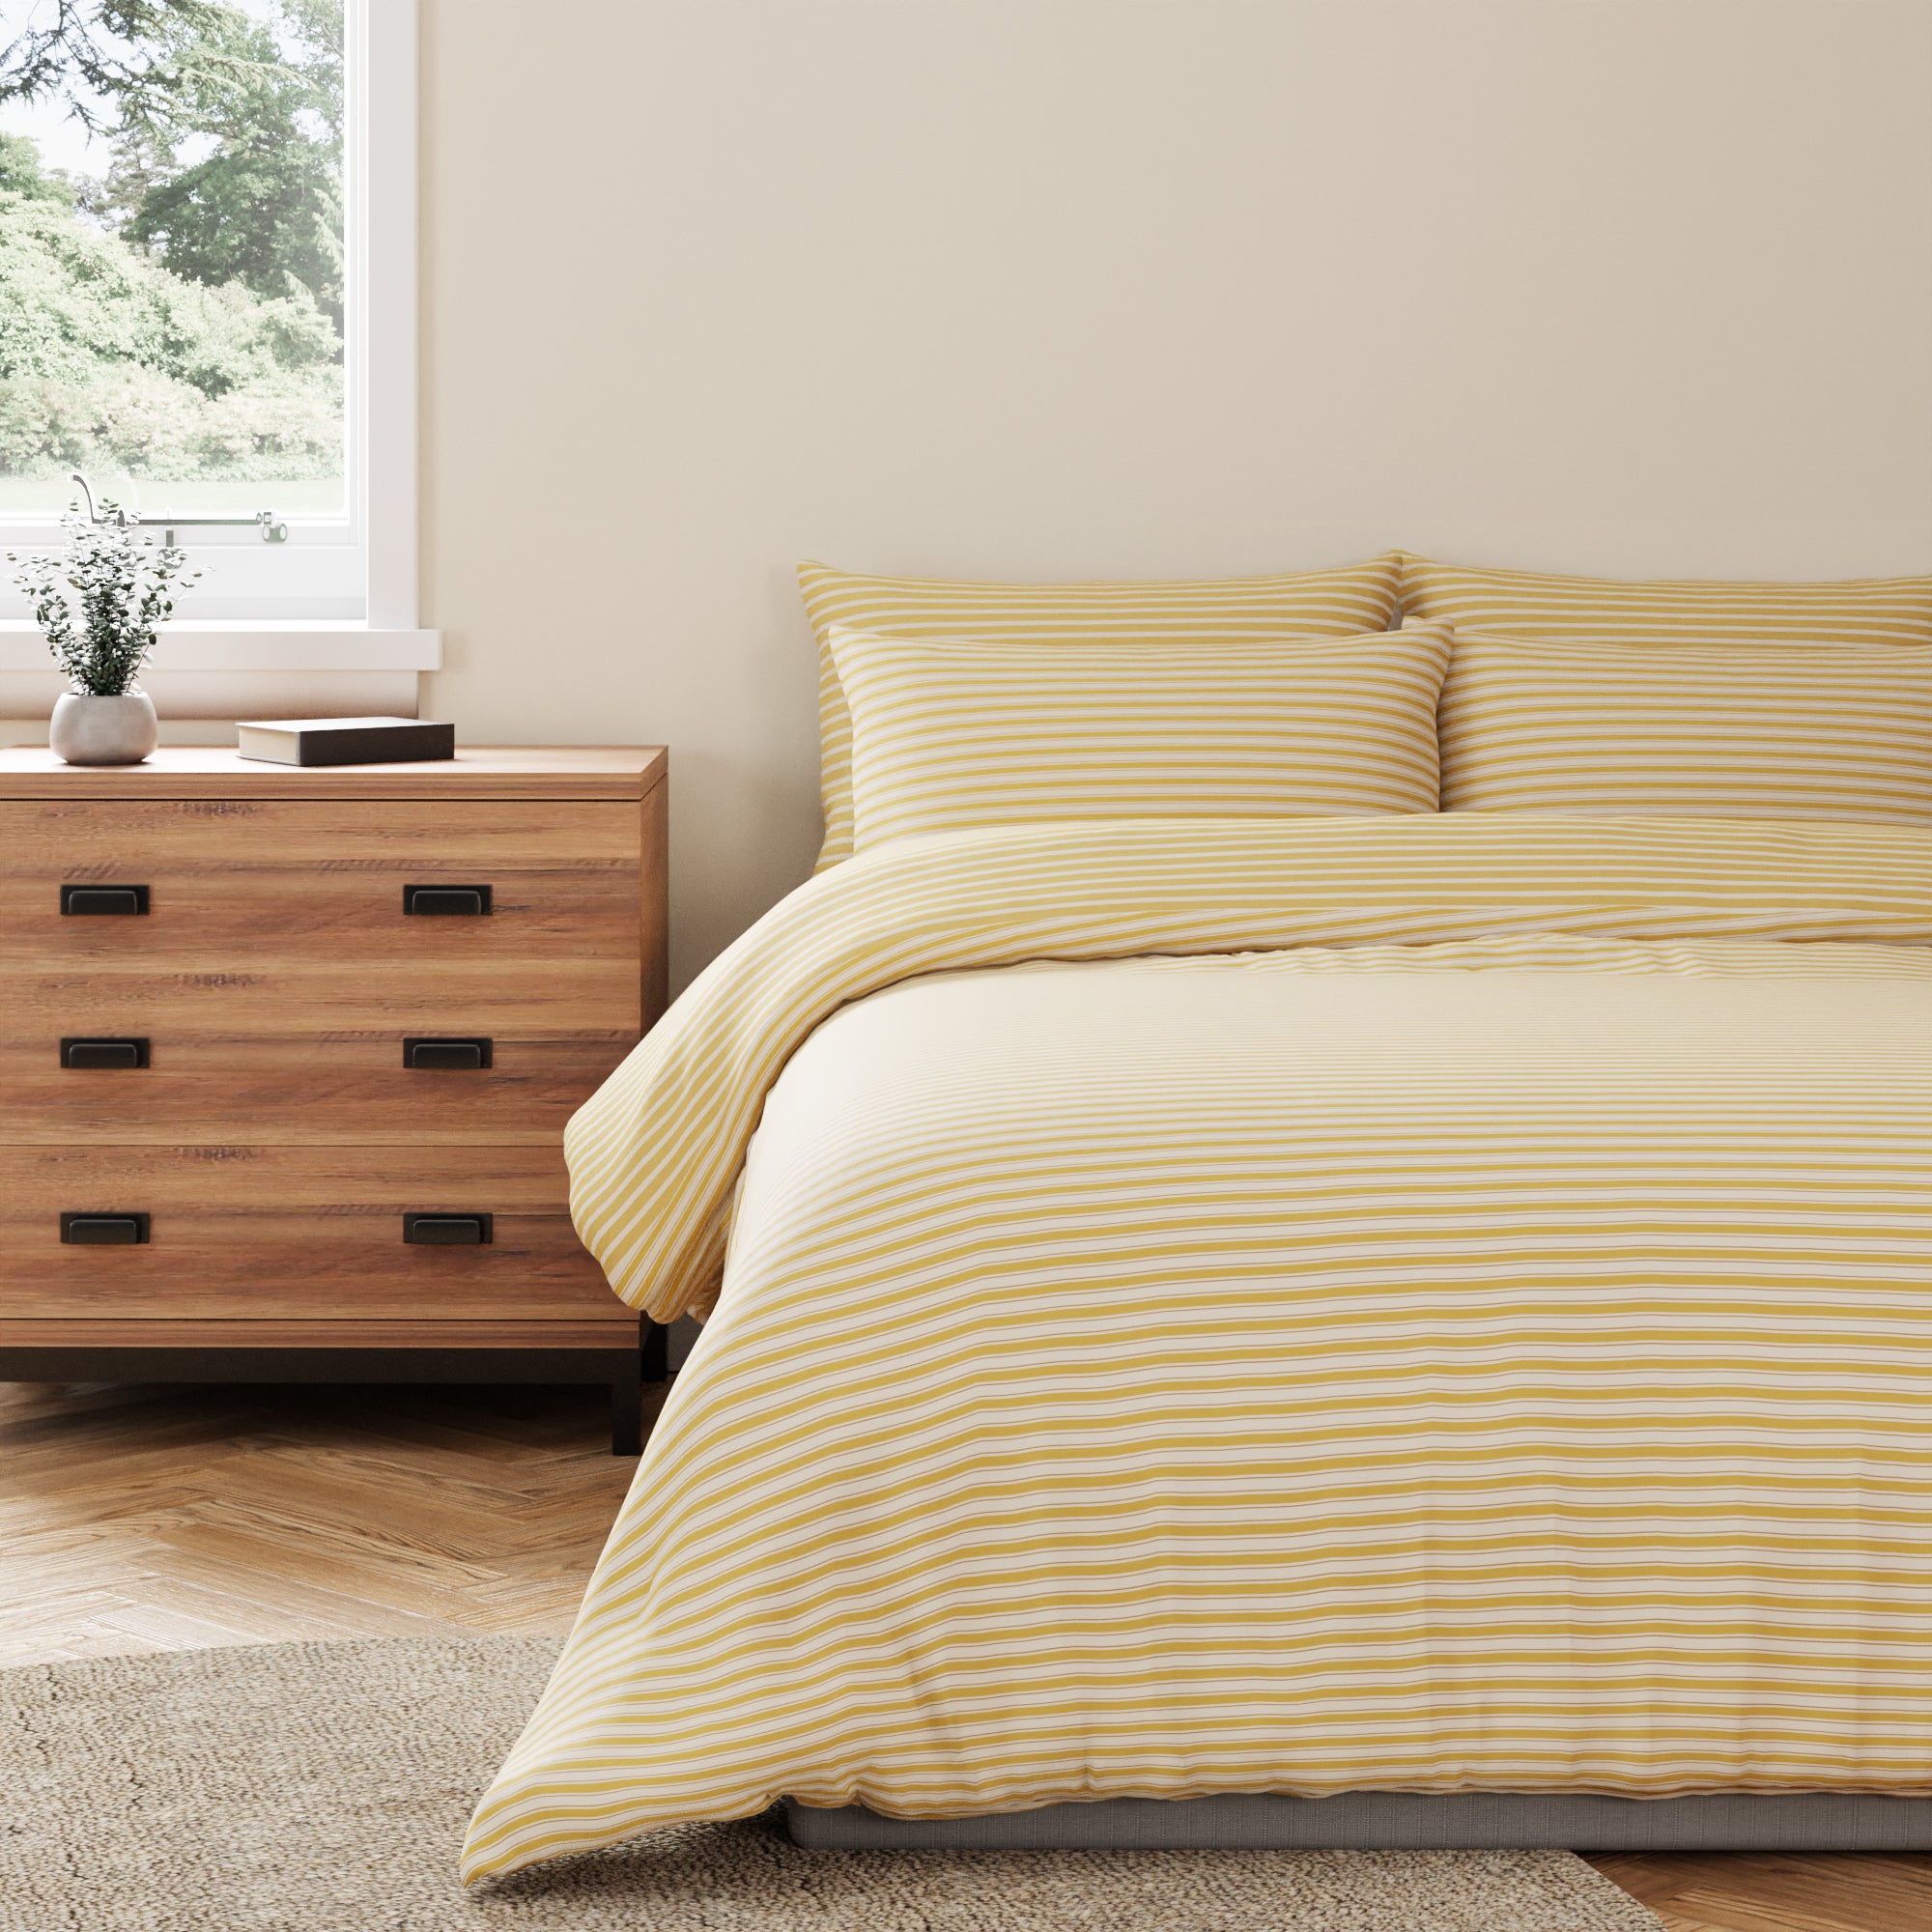 Photo of Bellamy yellow striped anti bacterial duvet cover and pillowcase set yellow